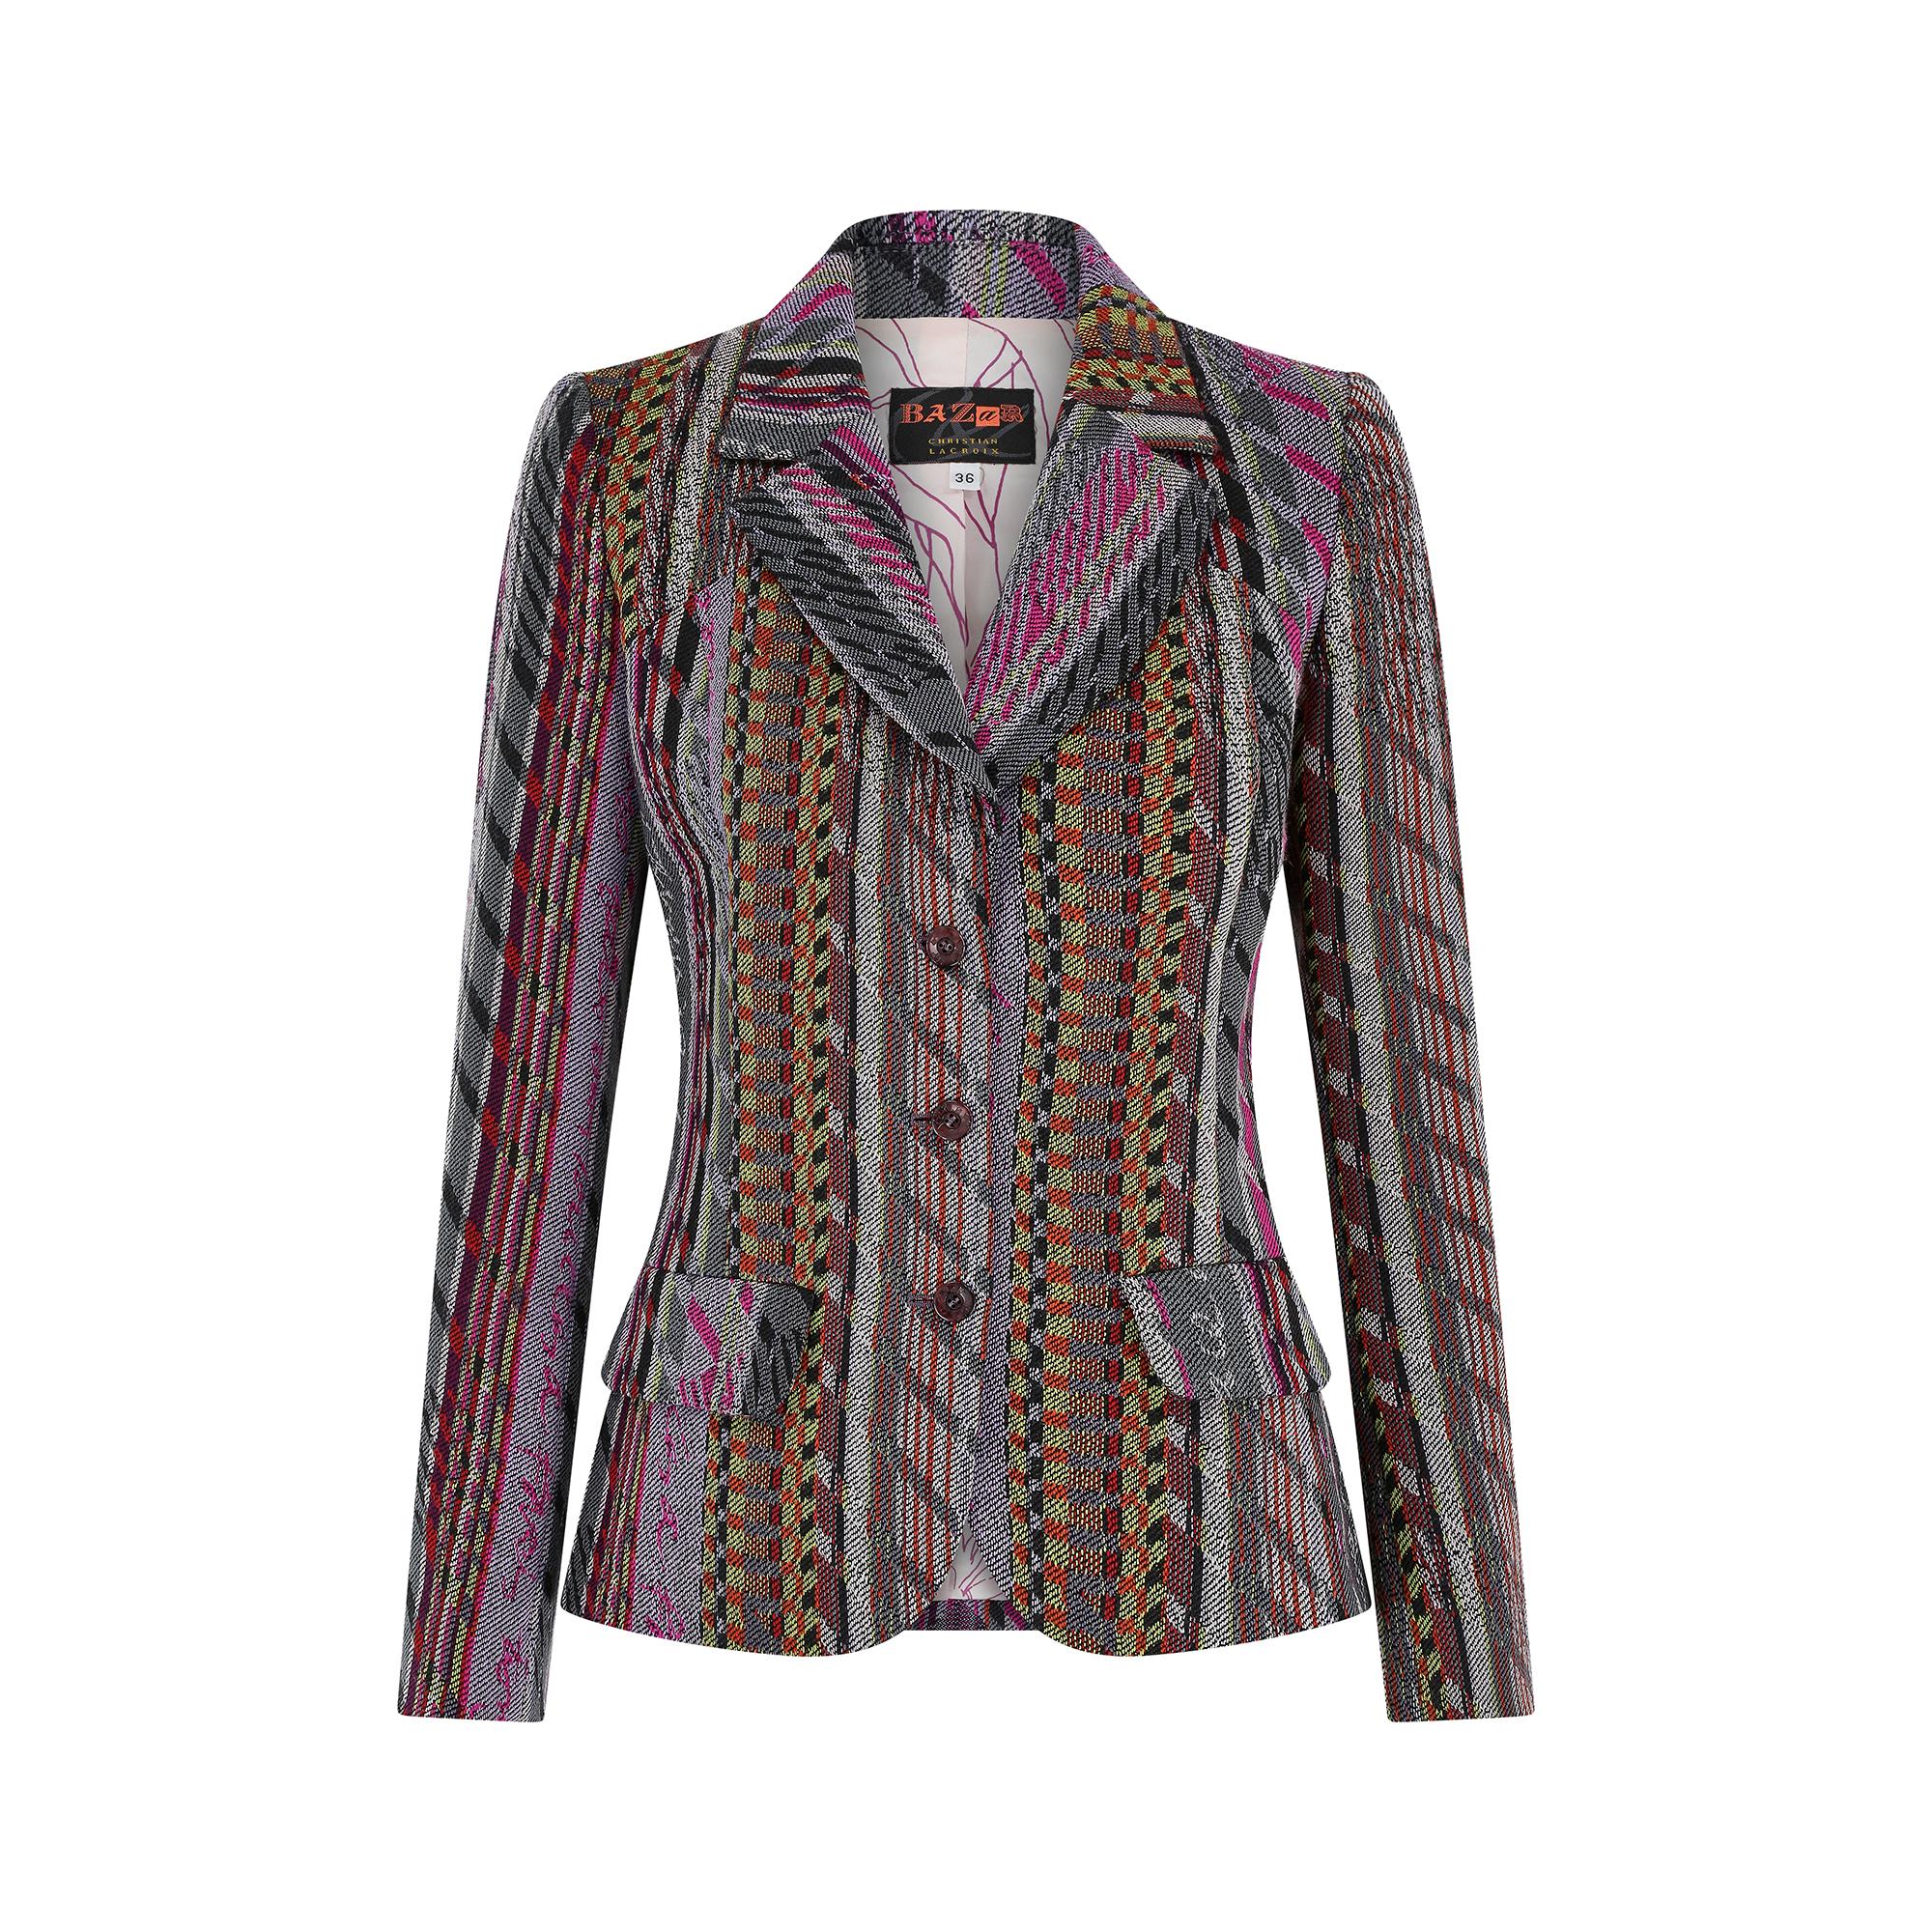 This 1990's Christian Lacroix jacket is in pristine vintage condition and made from 100% lambs wool.  Lacroix was a renowned French couturier and his work was characterized by a strong sense of colour, pattern and artisanal touches such as fringing,